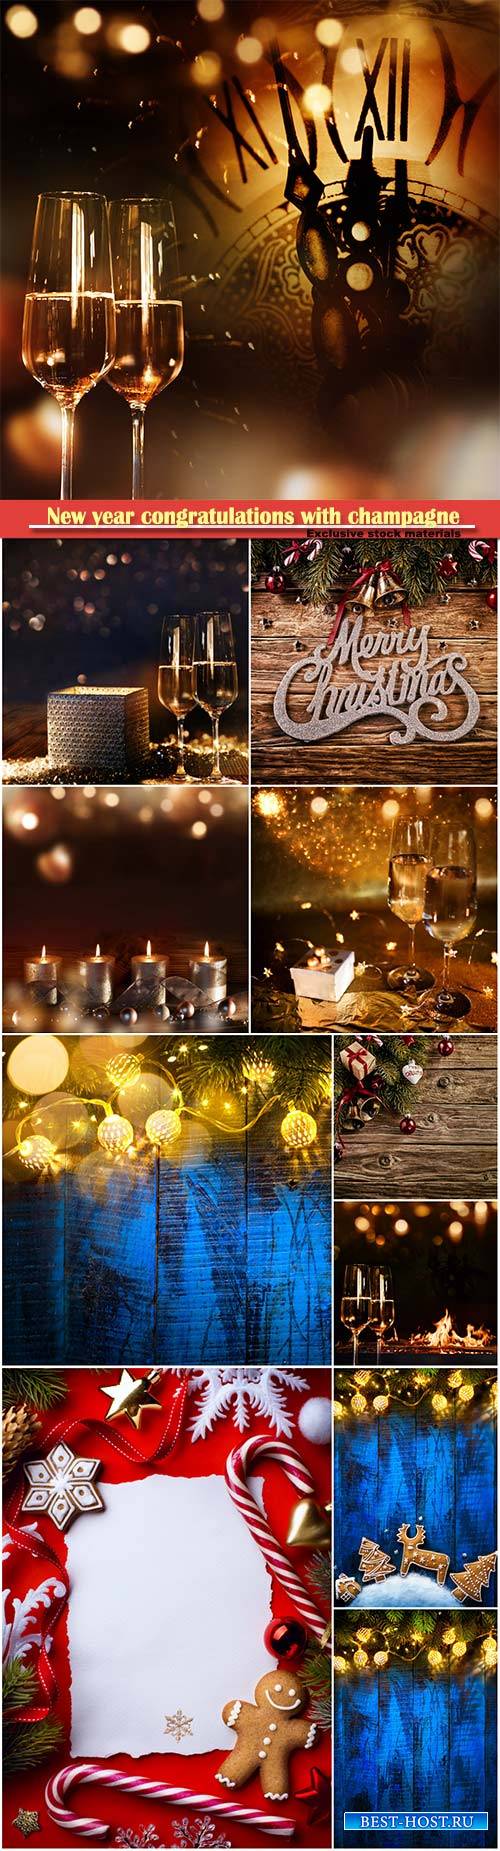 New year congratulations with champagne, Christmas decorations